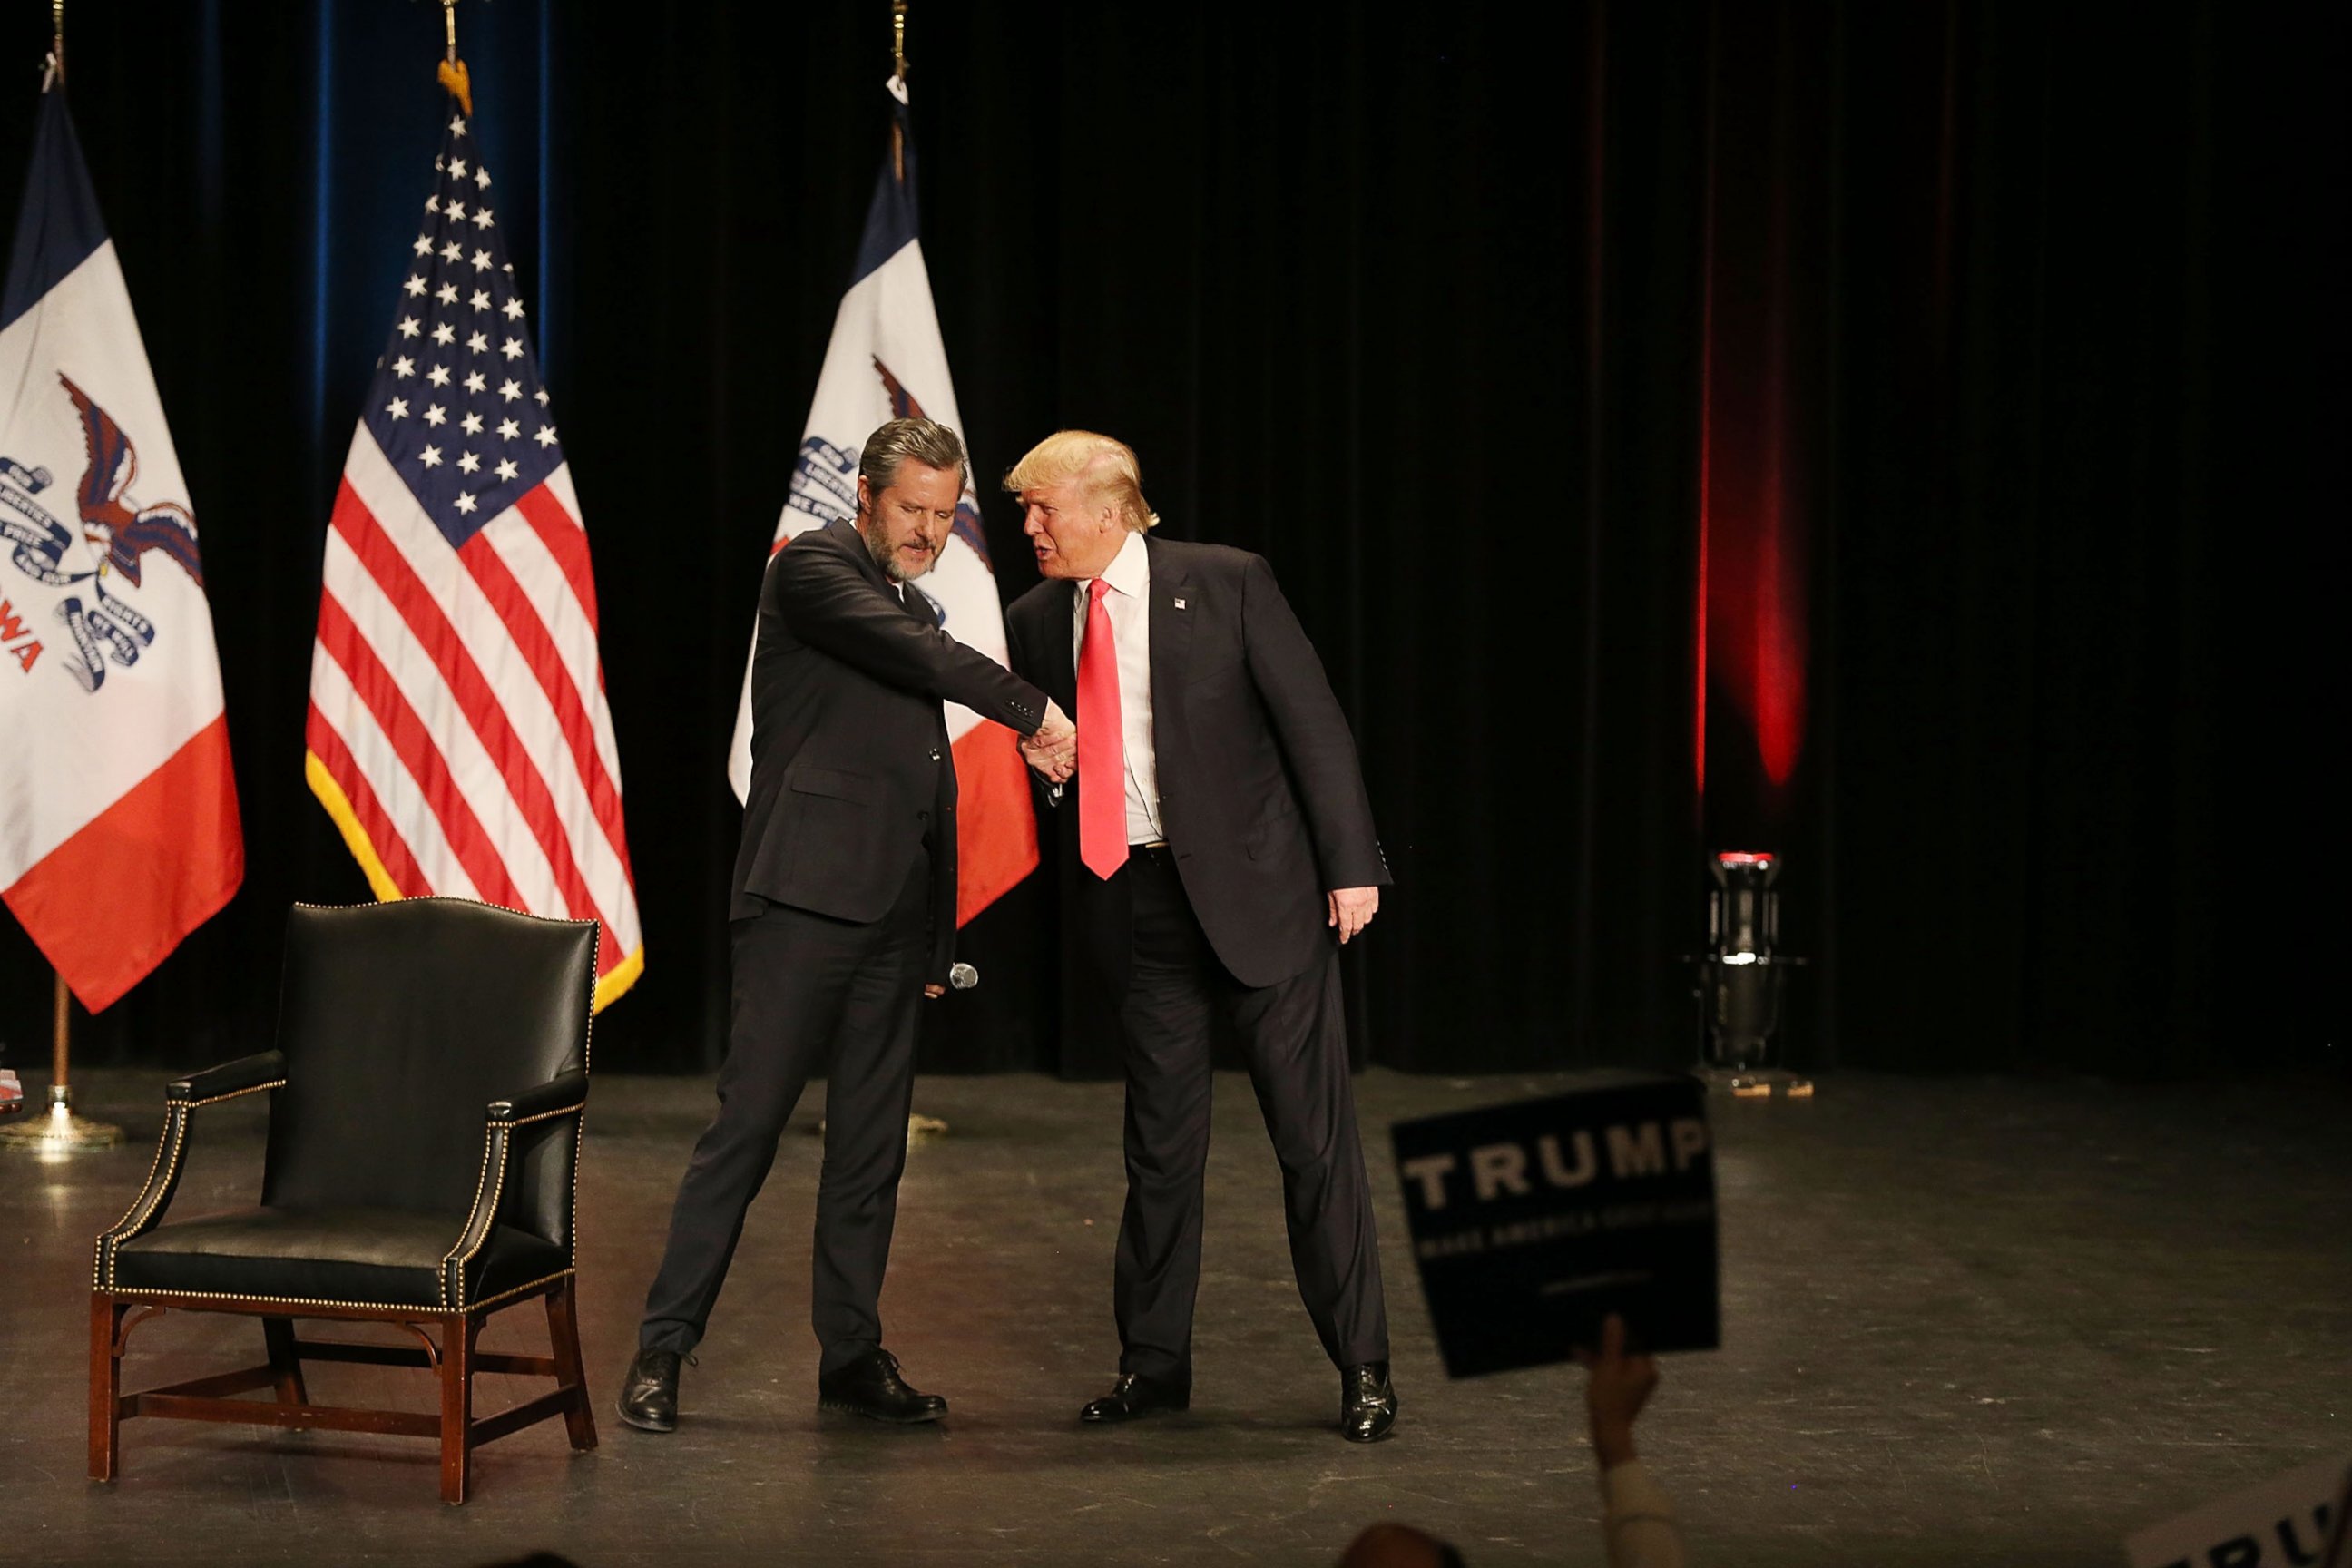 PHOTO: Jerry Falwell Jr., left, greets Donald Trump, right, as he walks on stage during a campaign rally at the Sioux City Orpheum Theatre, Jan. 31, 2016, in Sioux City, Iowa.